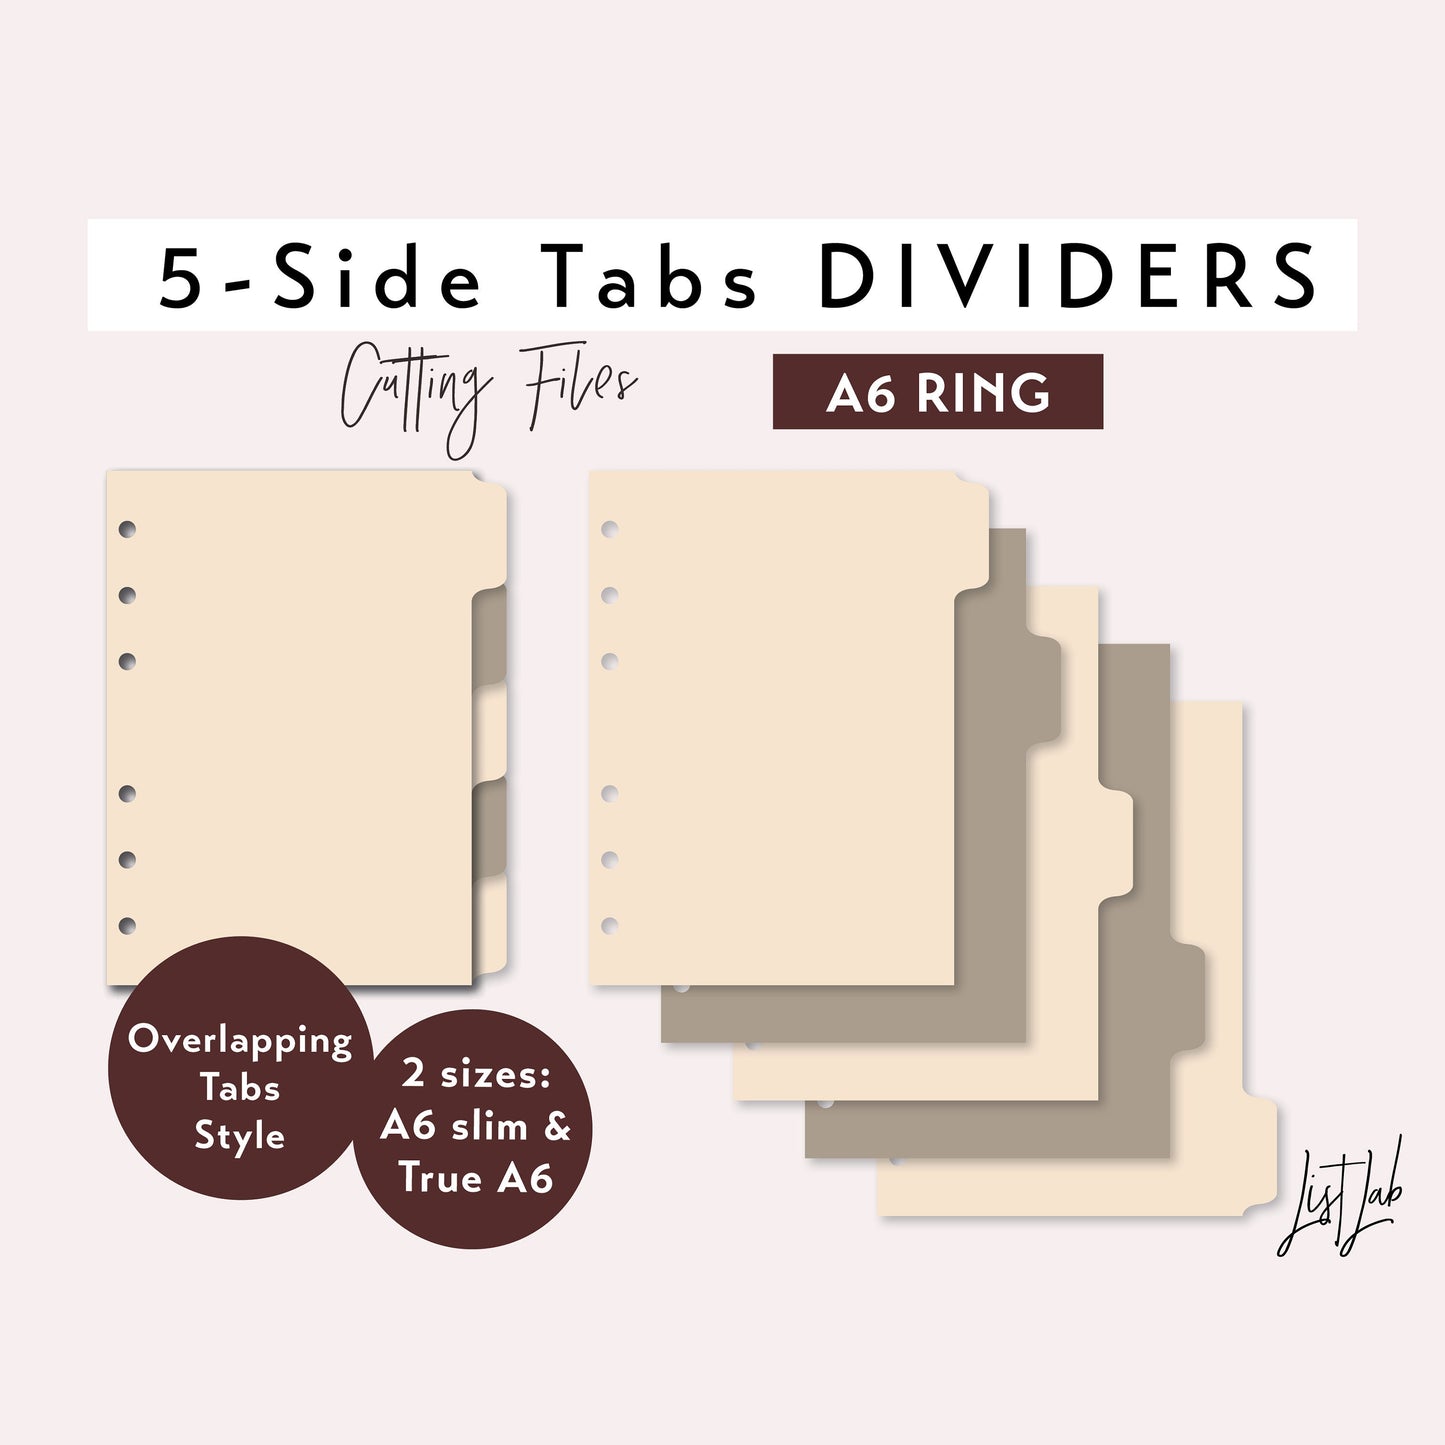 A6 Ring 5-SIDE Tab Dividers Cutting Files Set